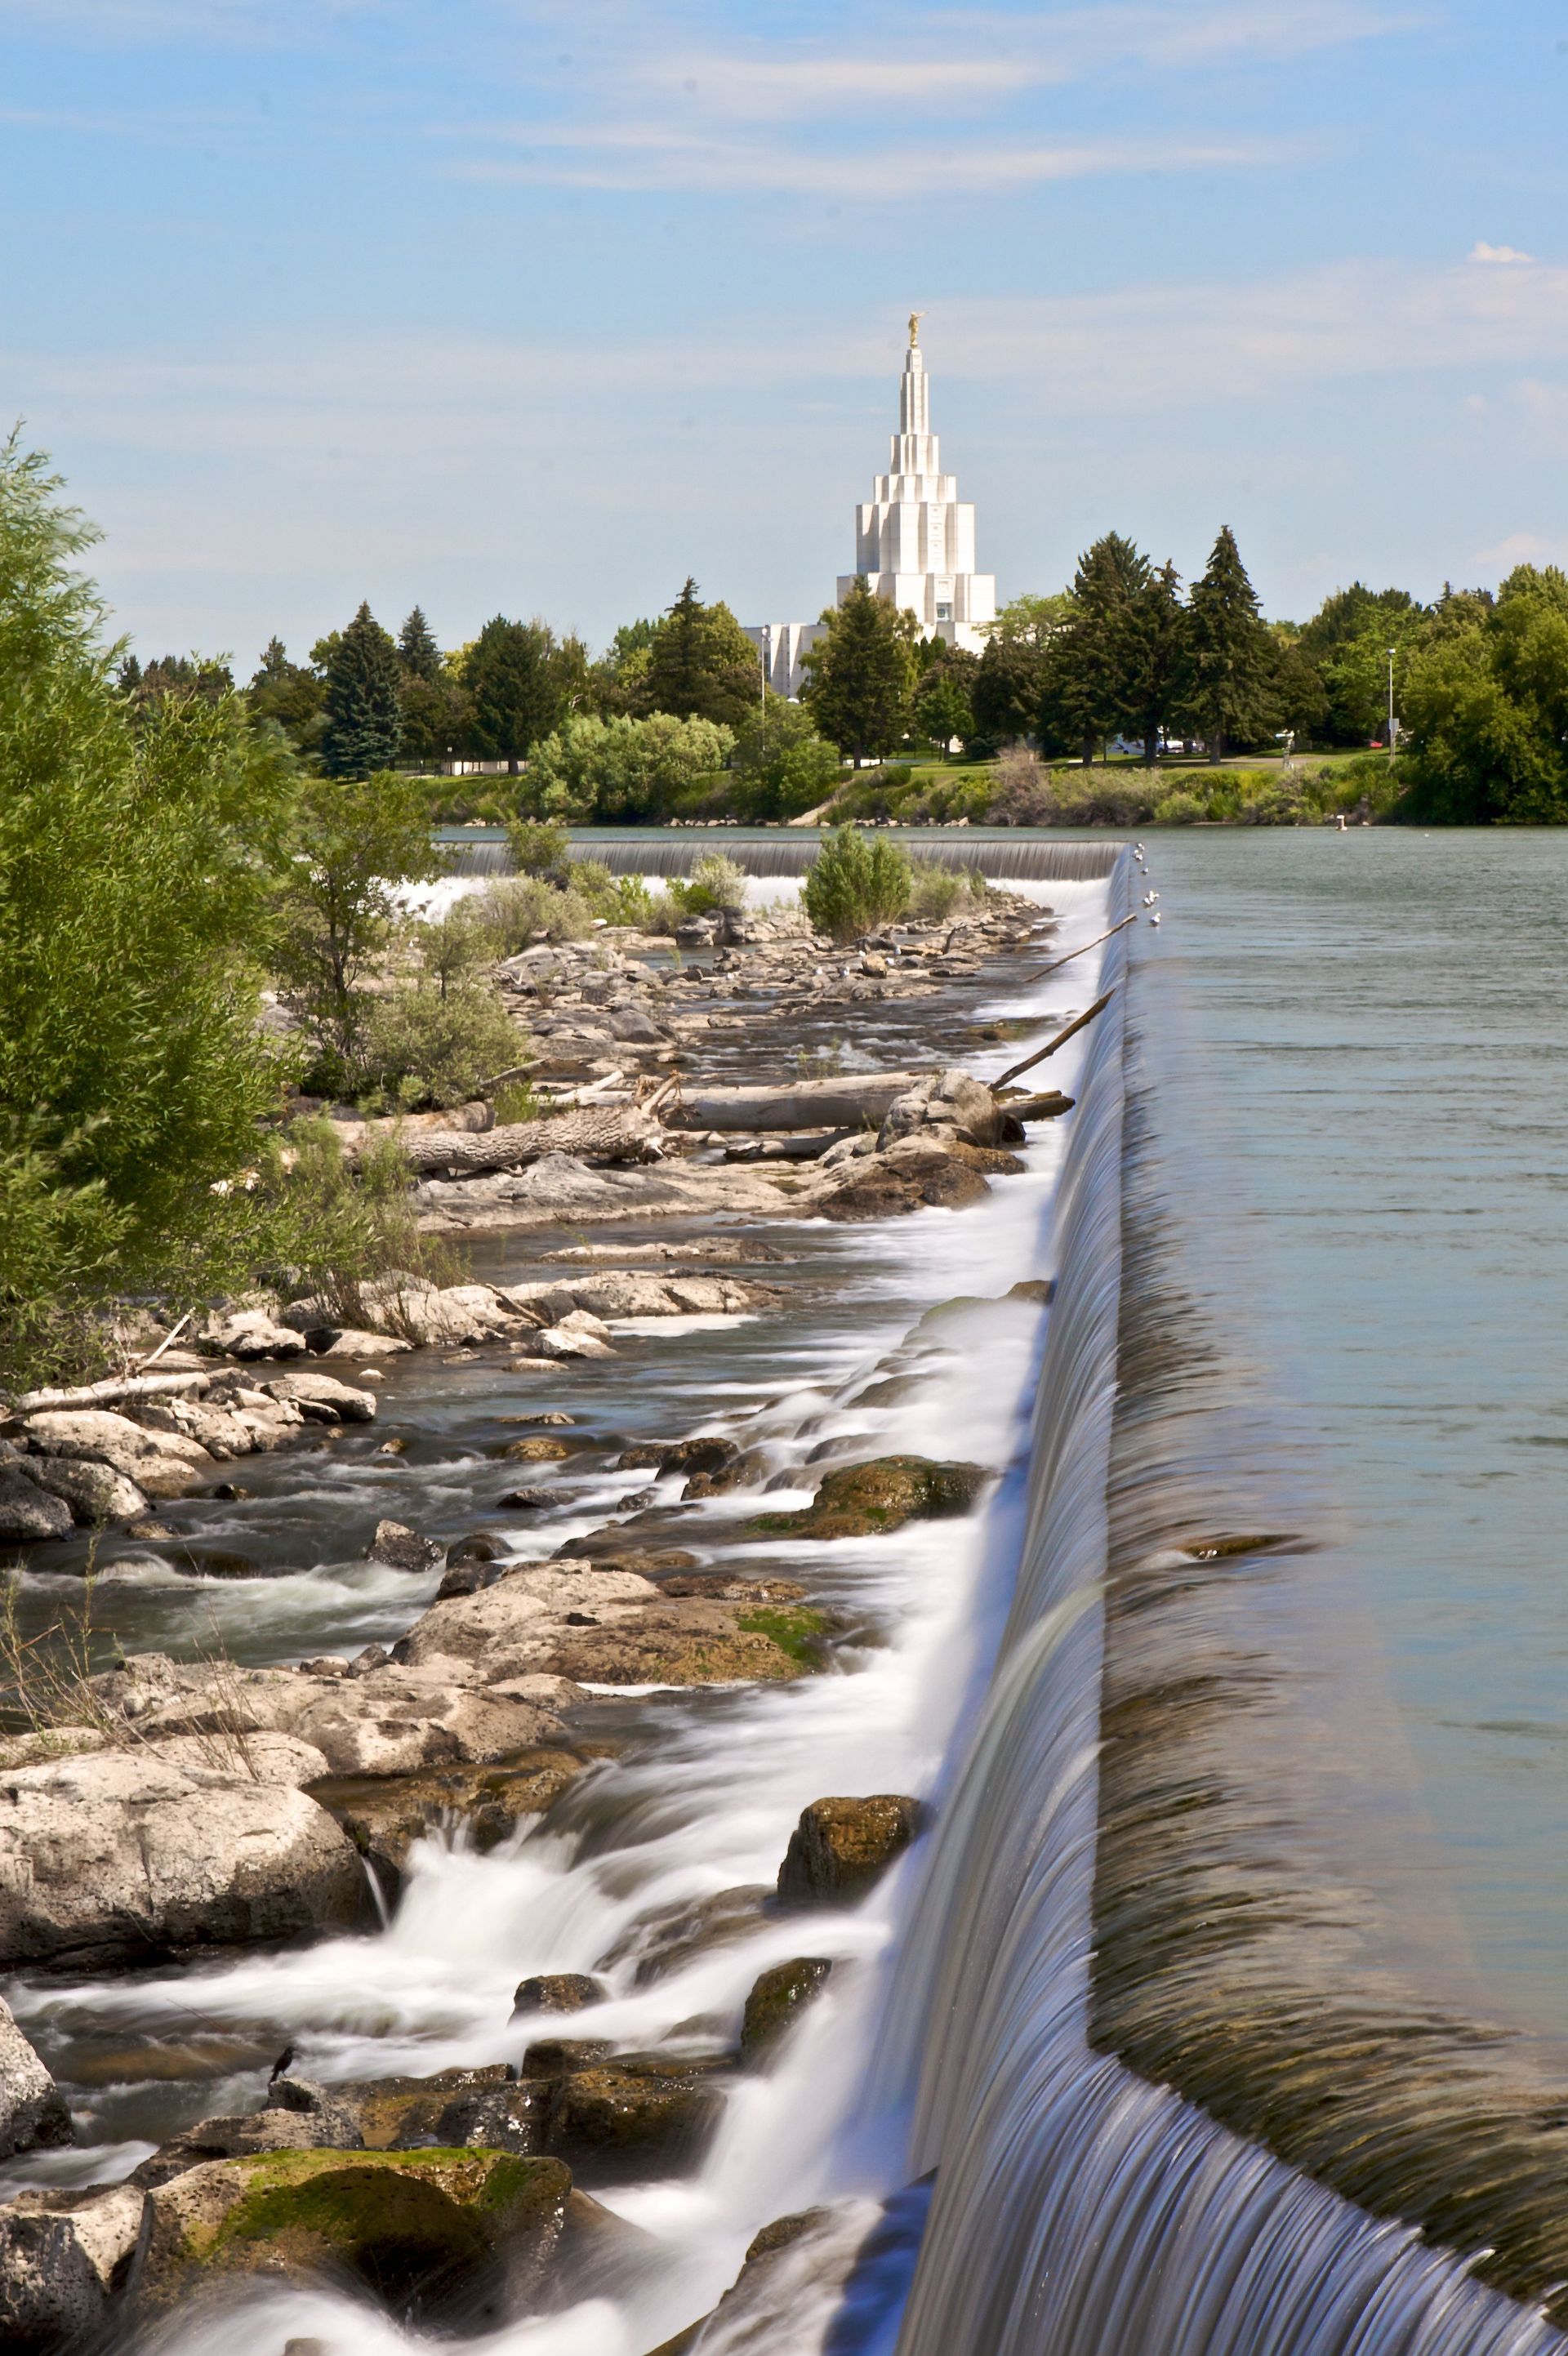 A distant view of the Idaho Falls Idaho Temple, near the waterfalls.